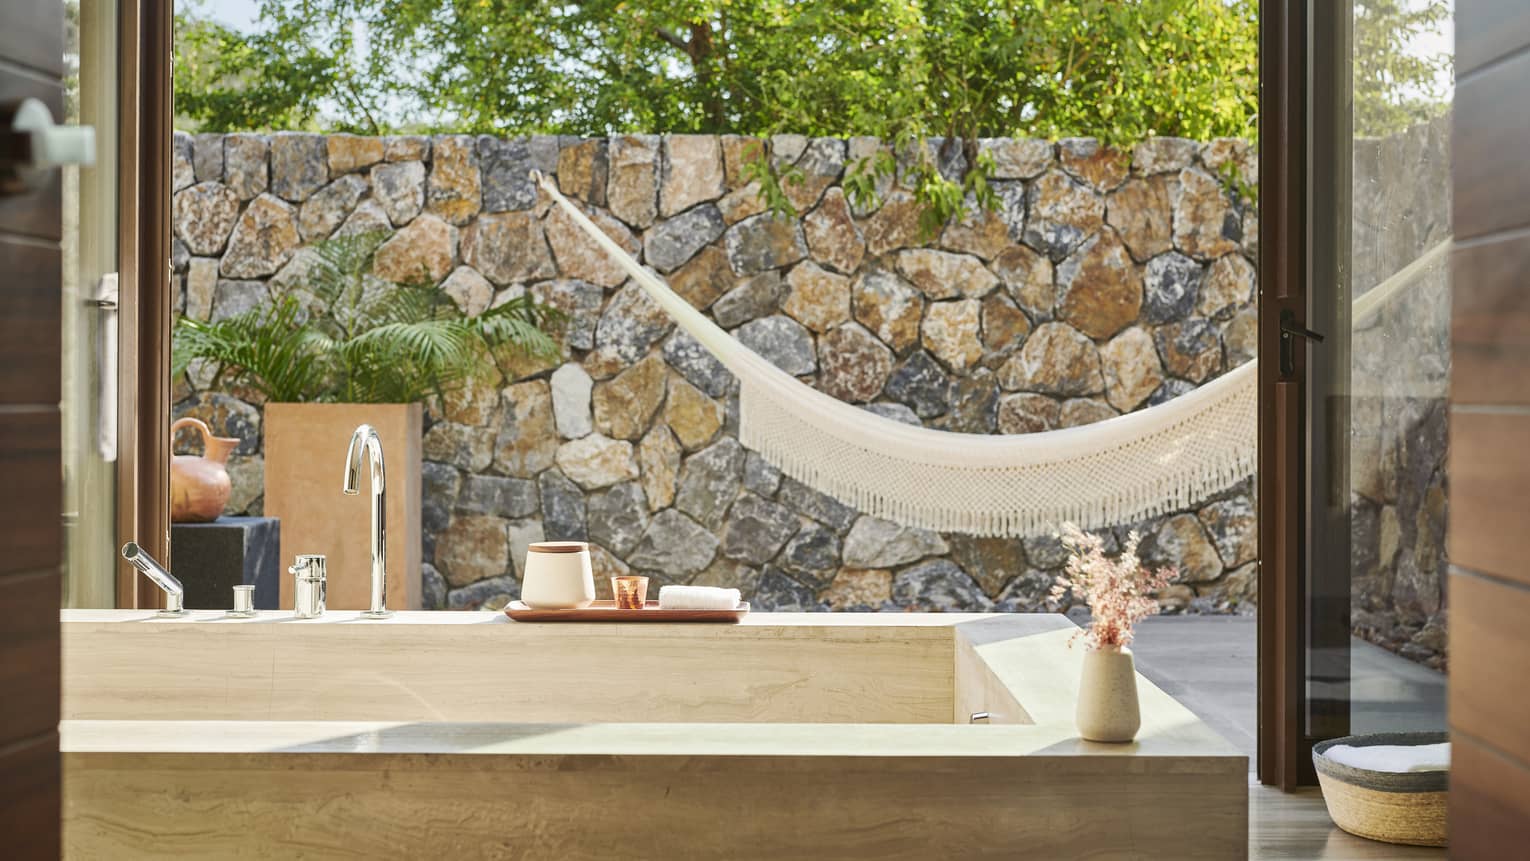 A bathroom with a large bath and large window looking outside at a hammock and stone wall.